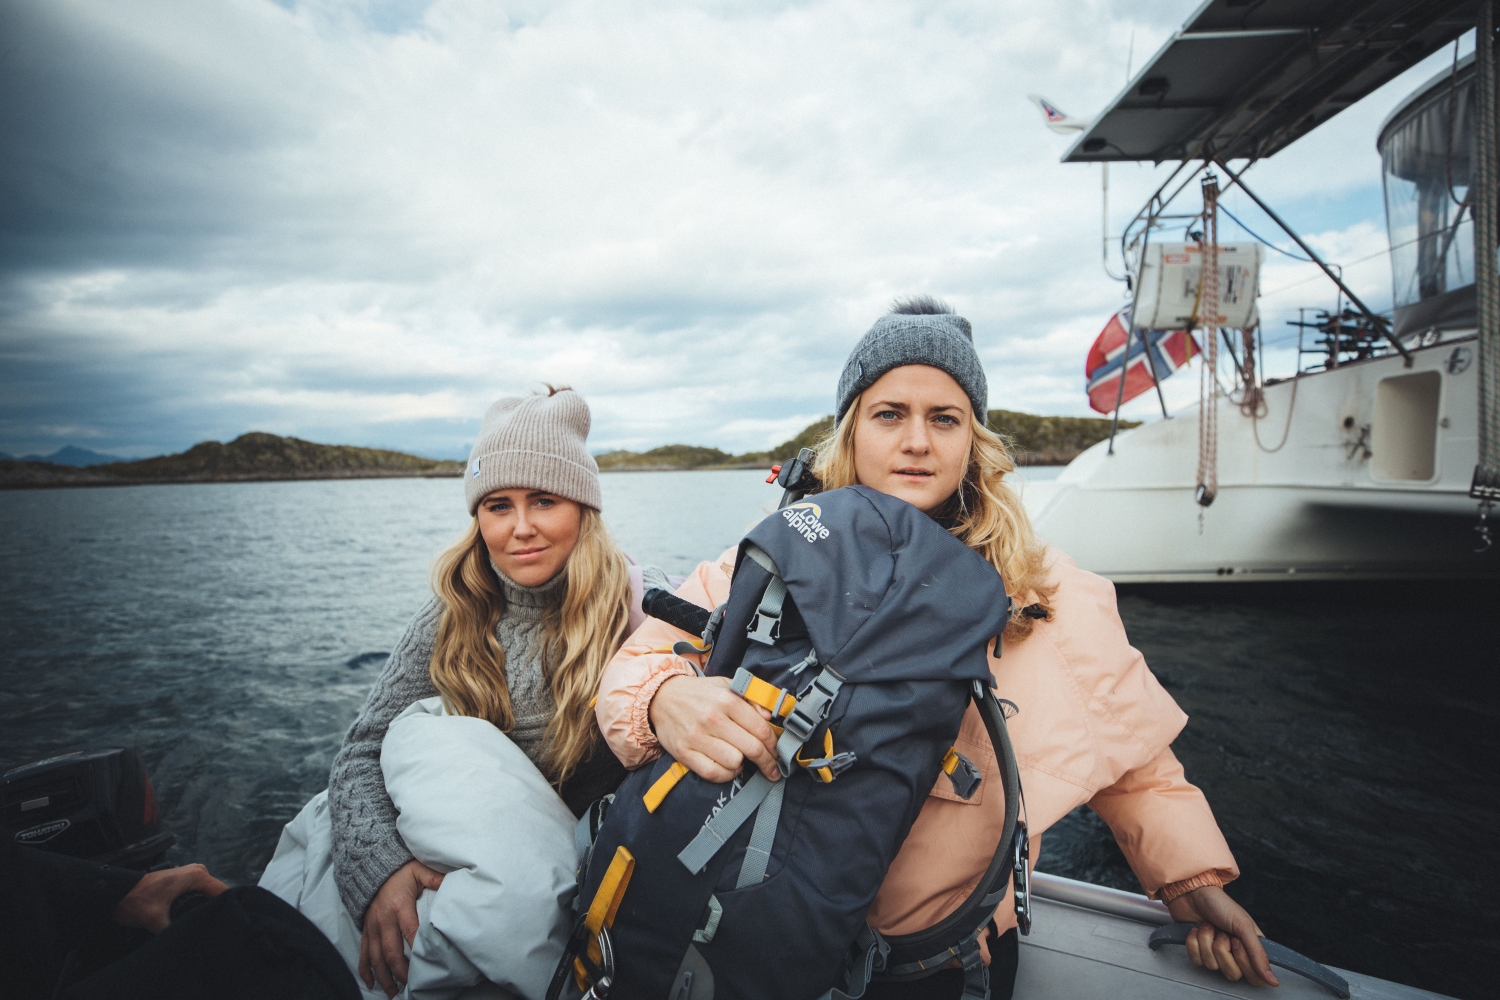 two women on dinghy holding life jackets